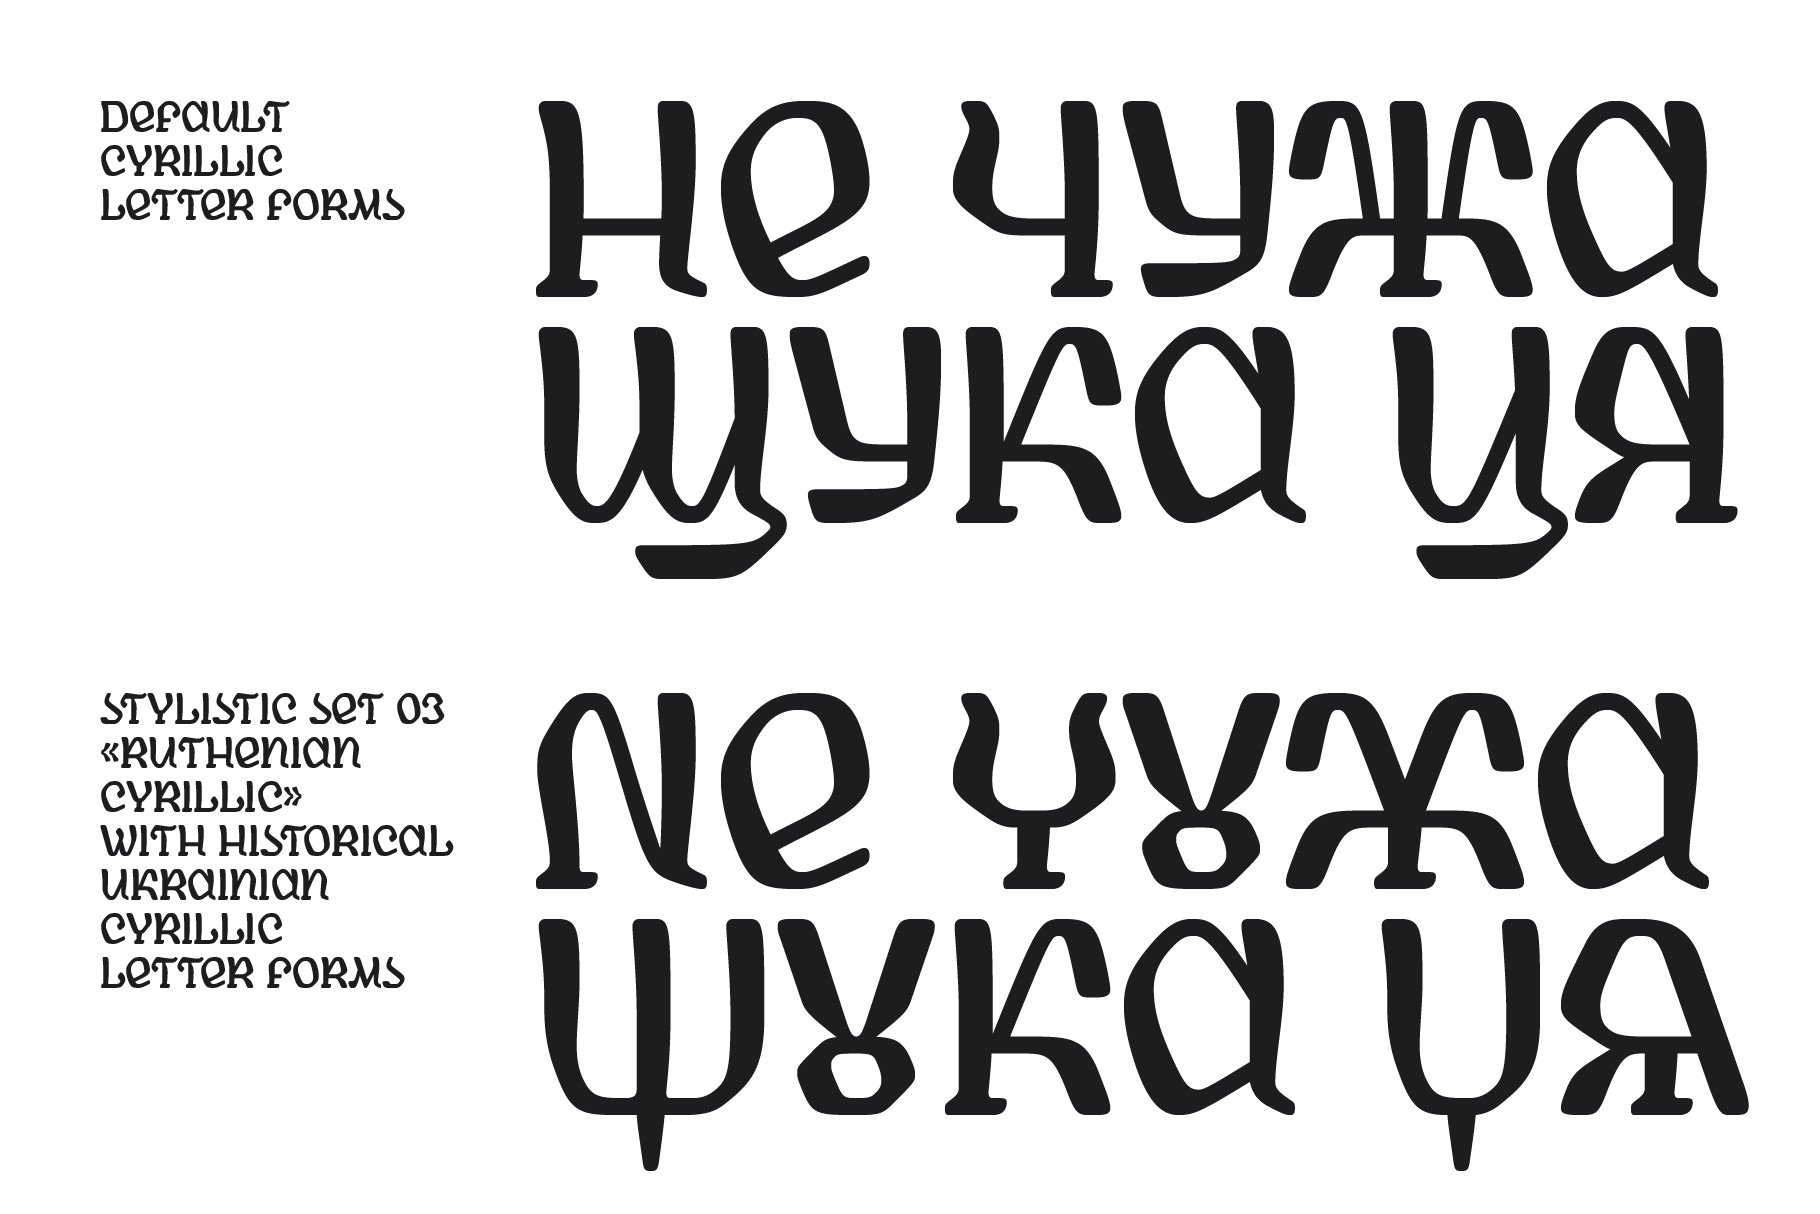 A set of three different type of lettering.